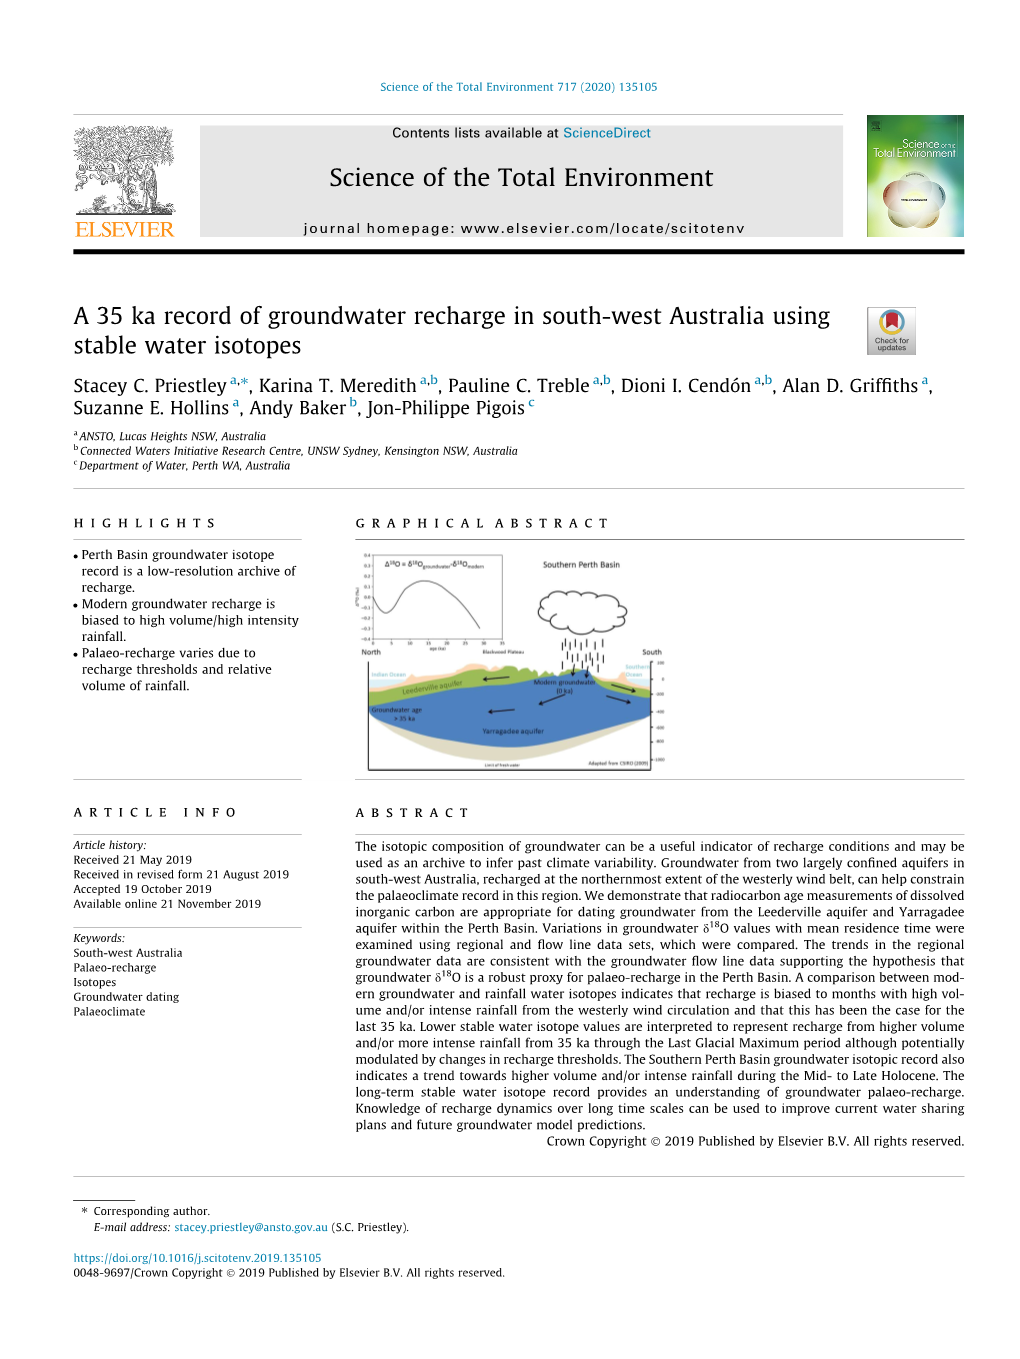 A 35€Ka Record of Groundwater Recharge in South-West Australia